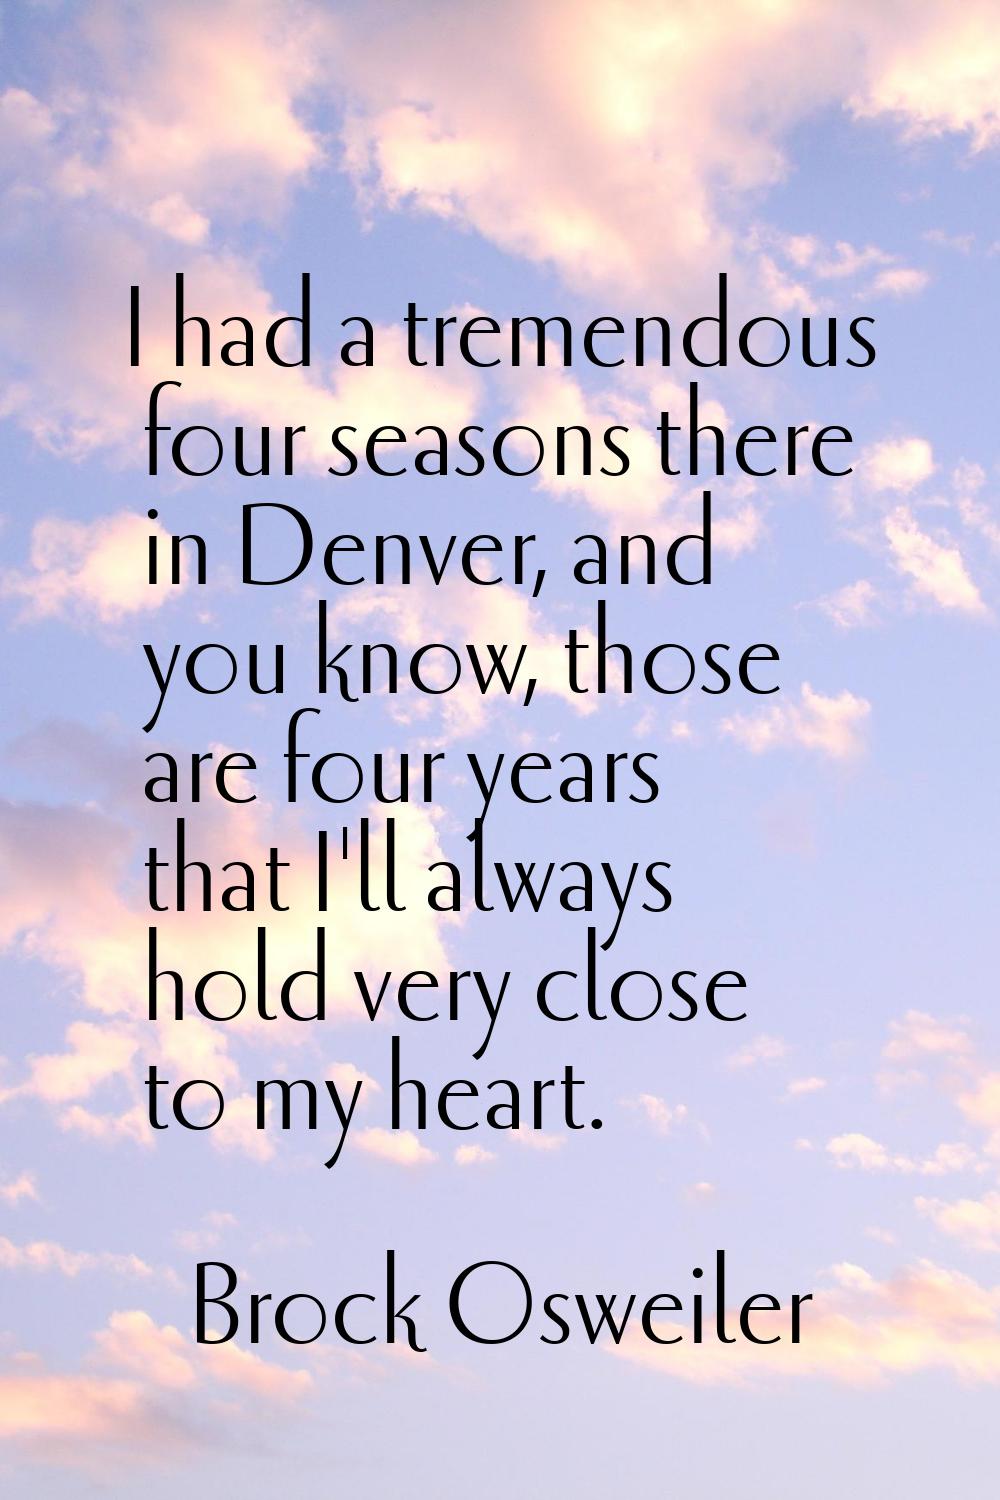 I had a tremendous four seasons there in Denver, and you know, those are four years that I'll alway